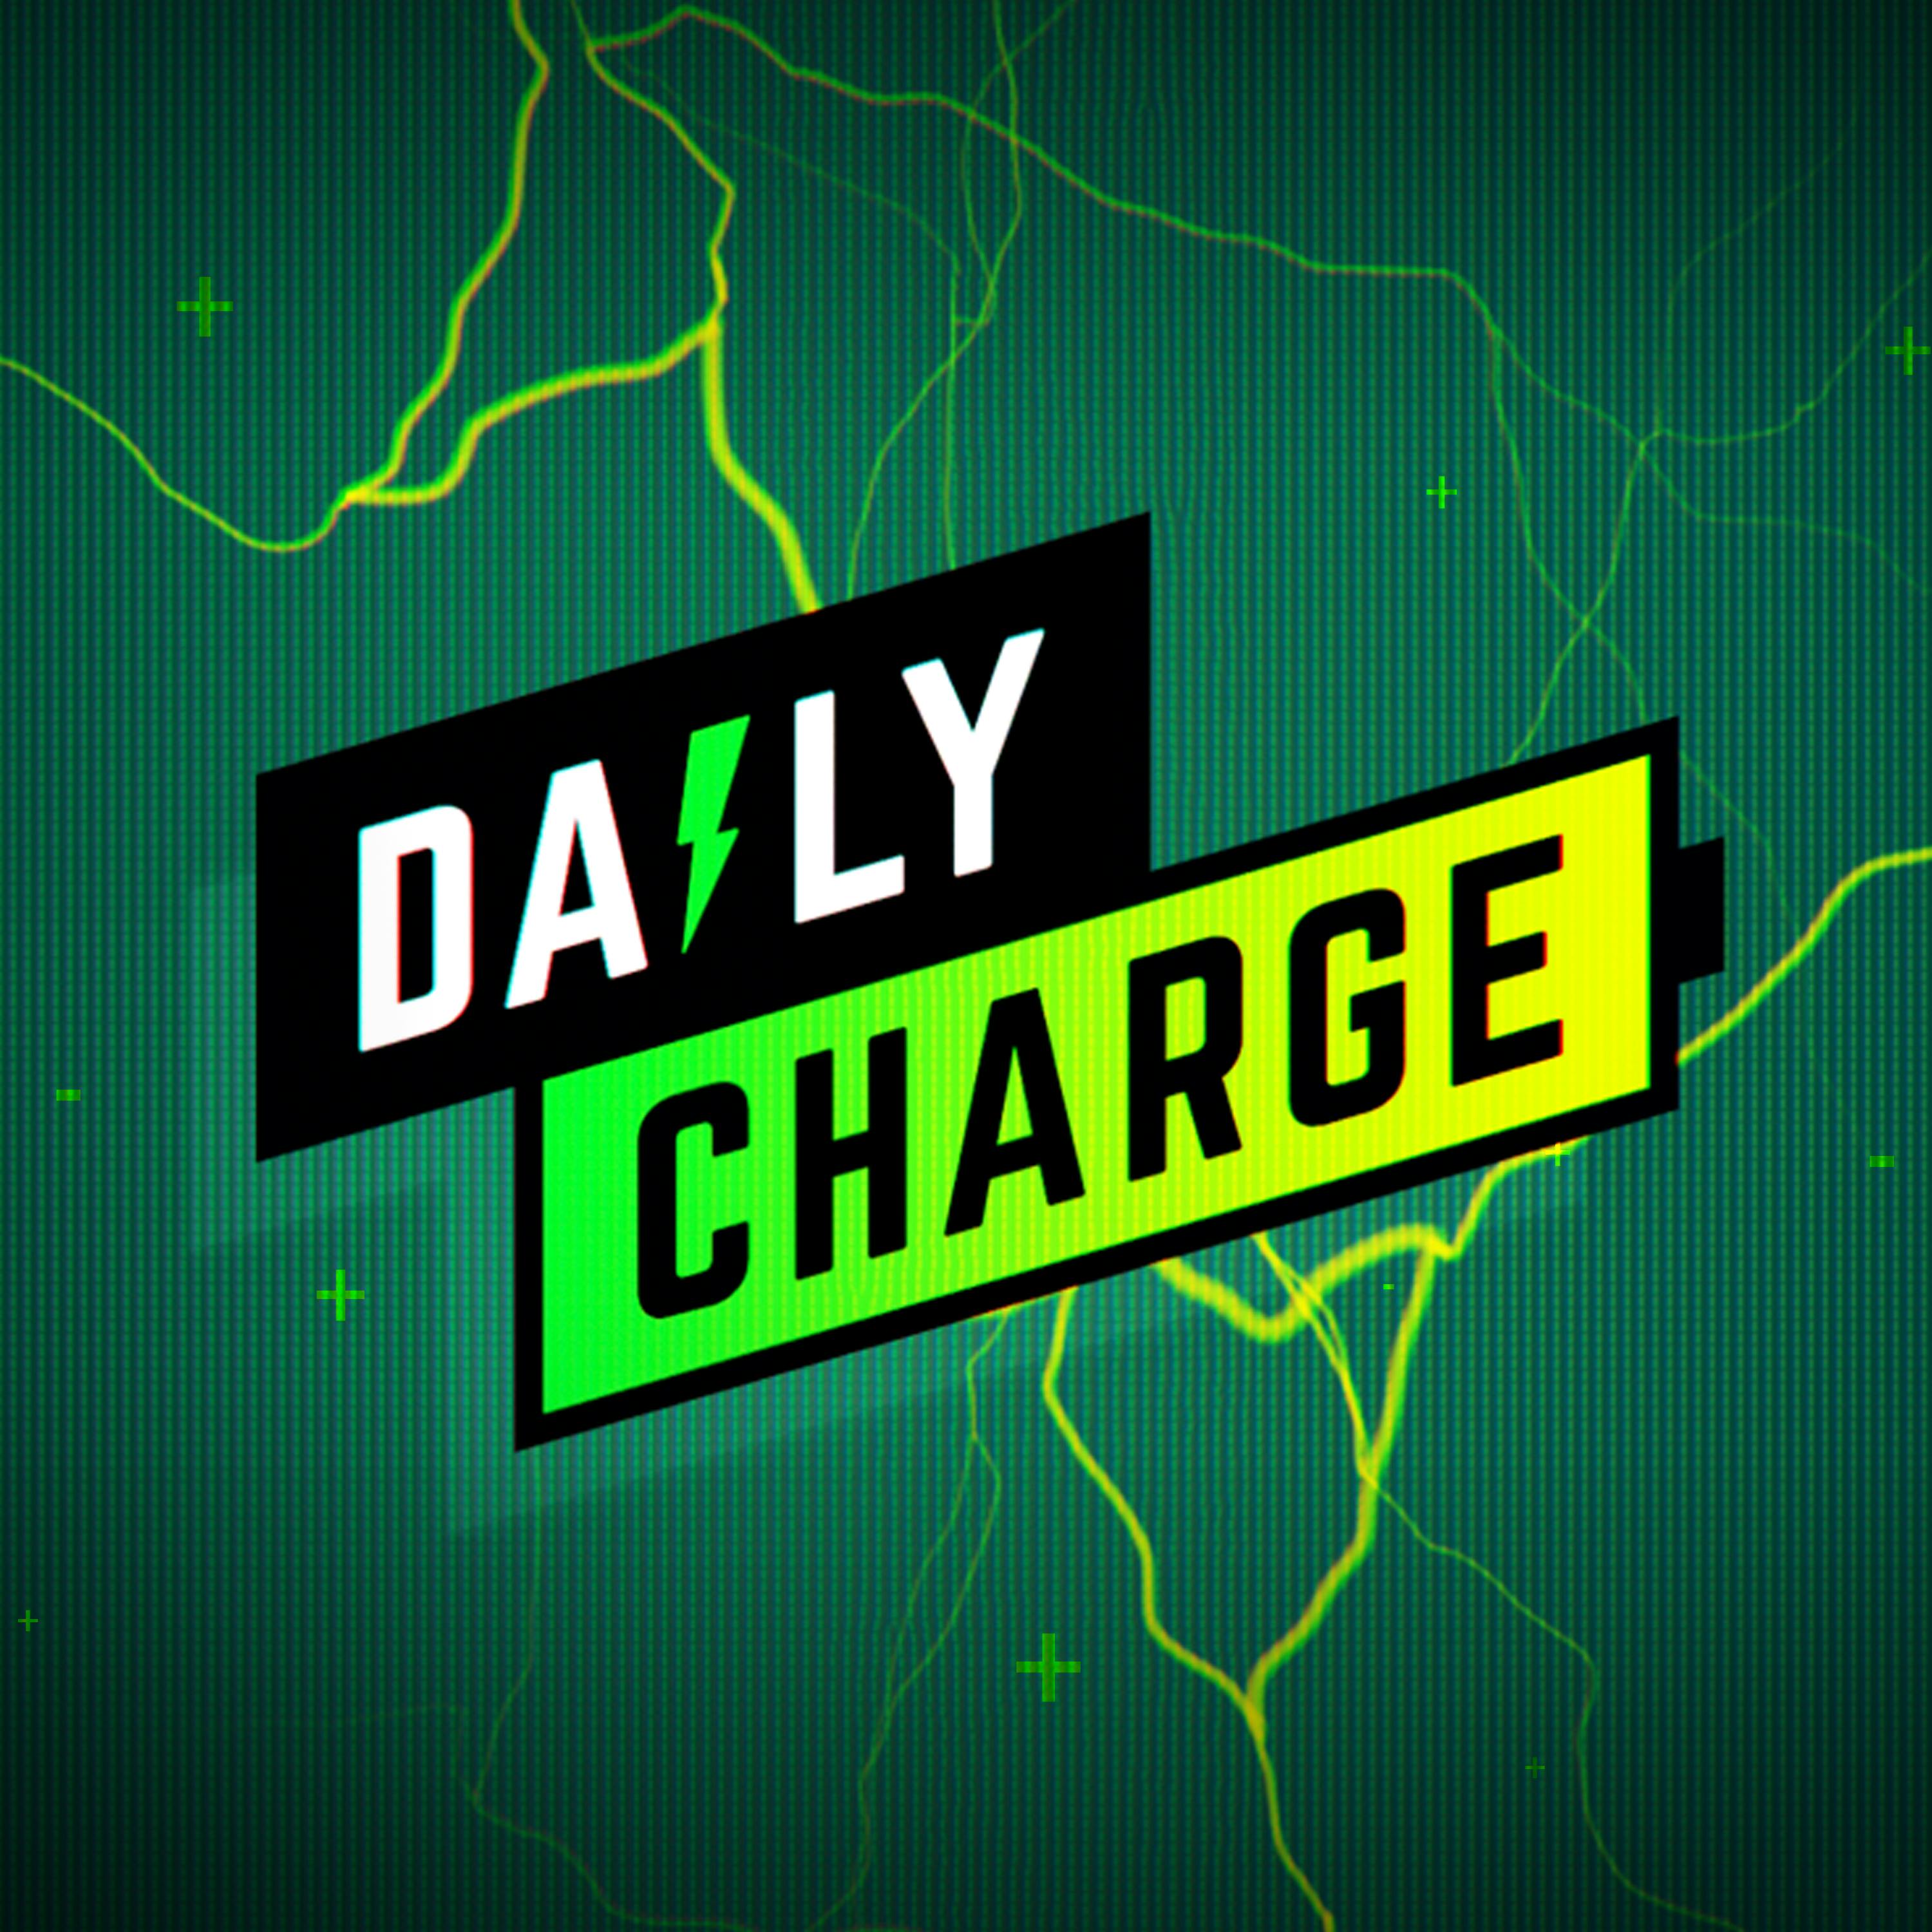 Apple will let you repair your own iPhone: Here’s what you need to know (The Daily Charge, 11/17/2021)